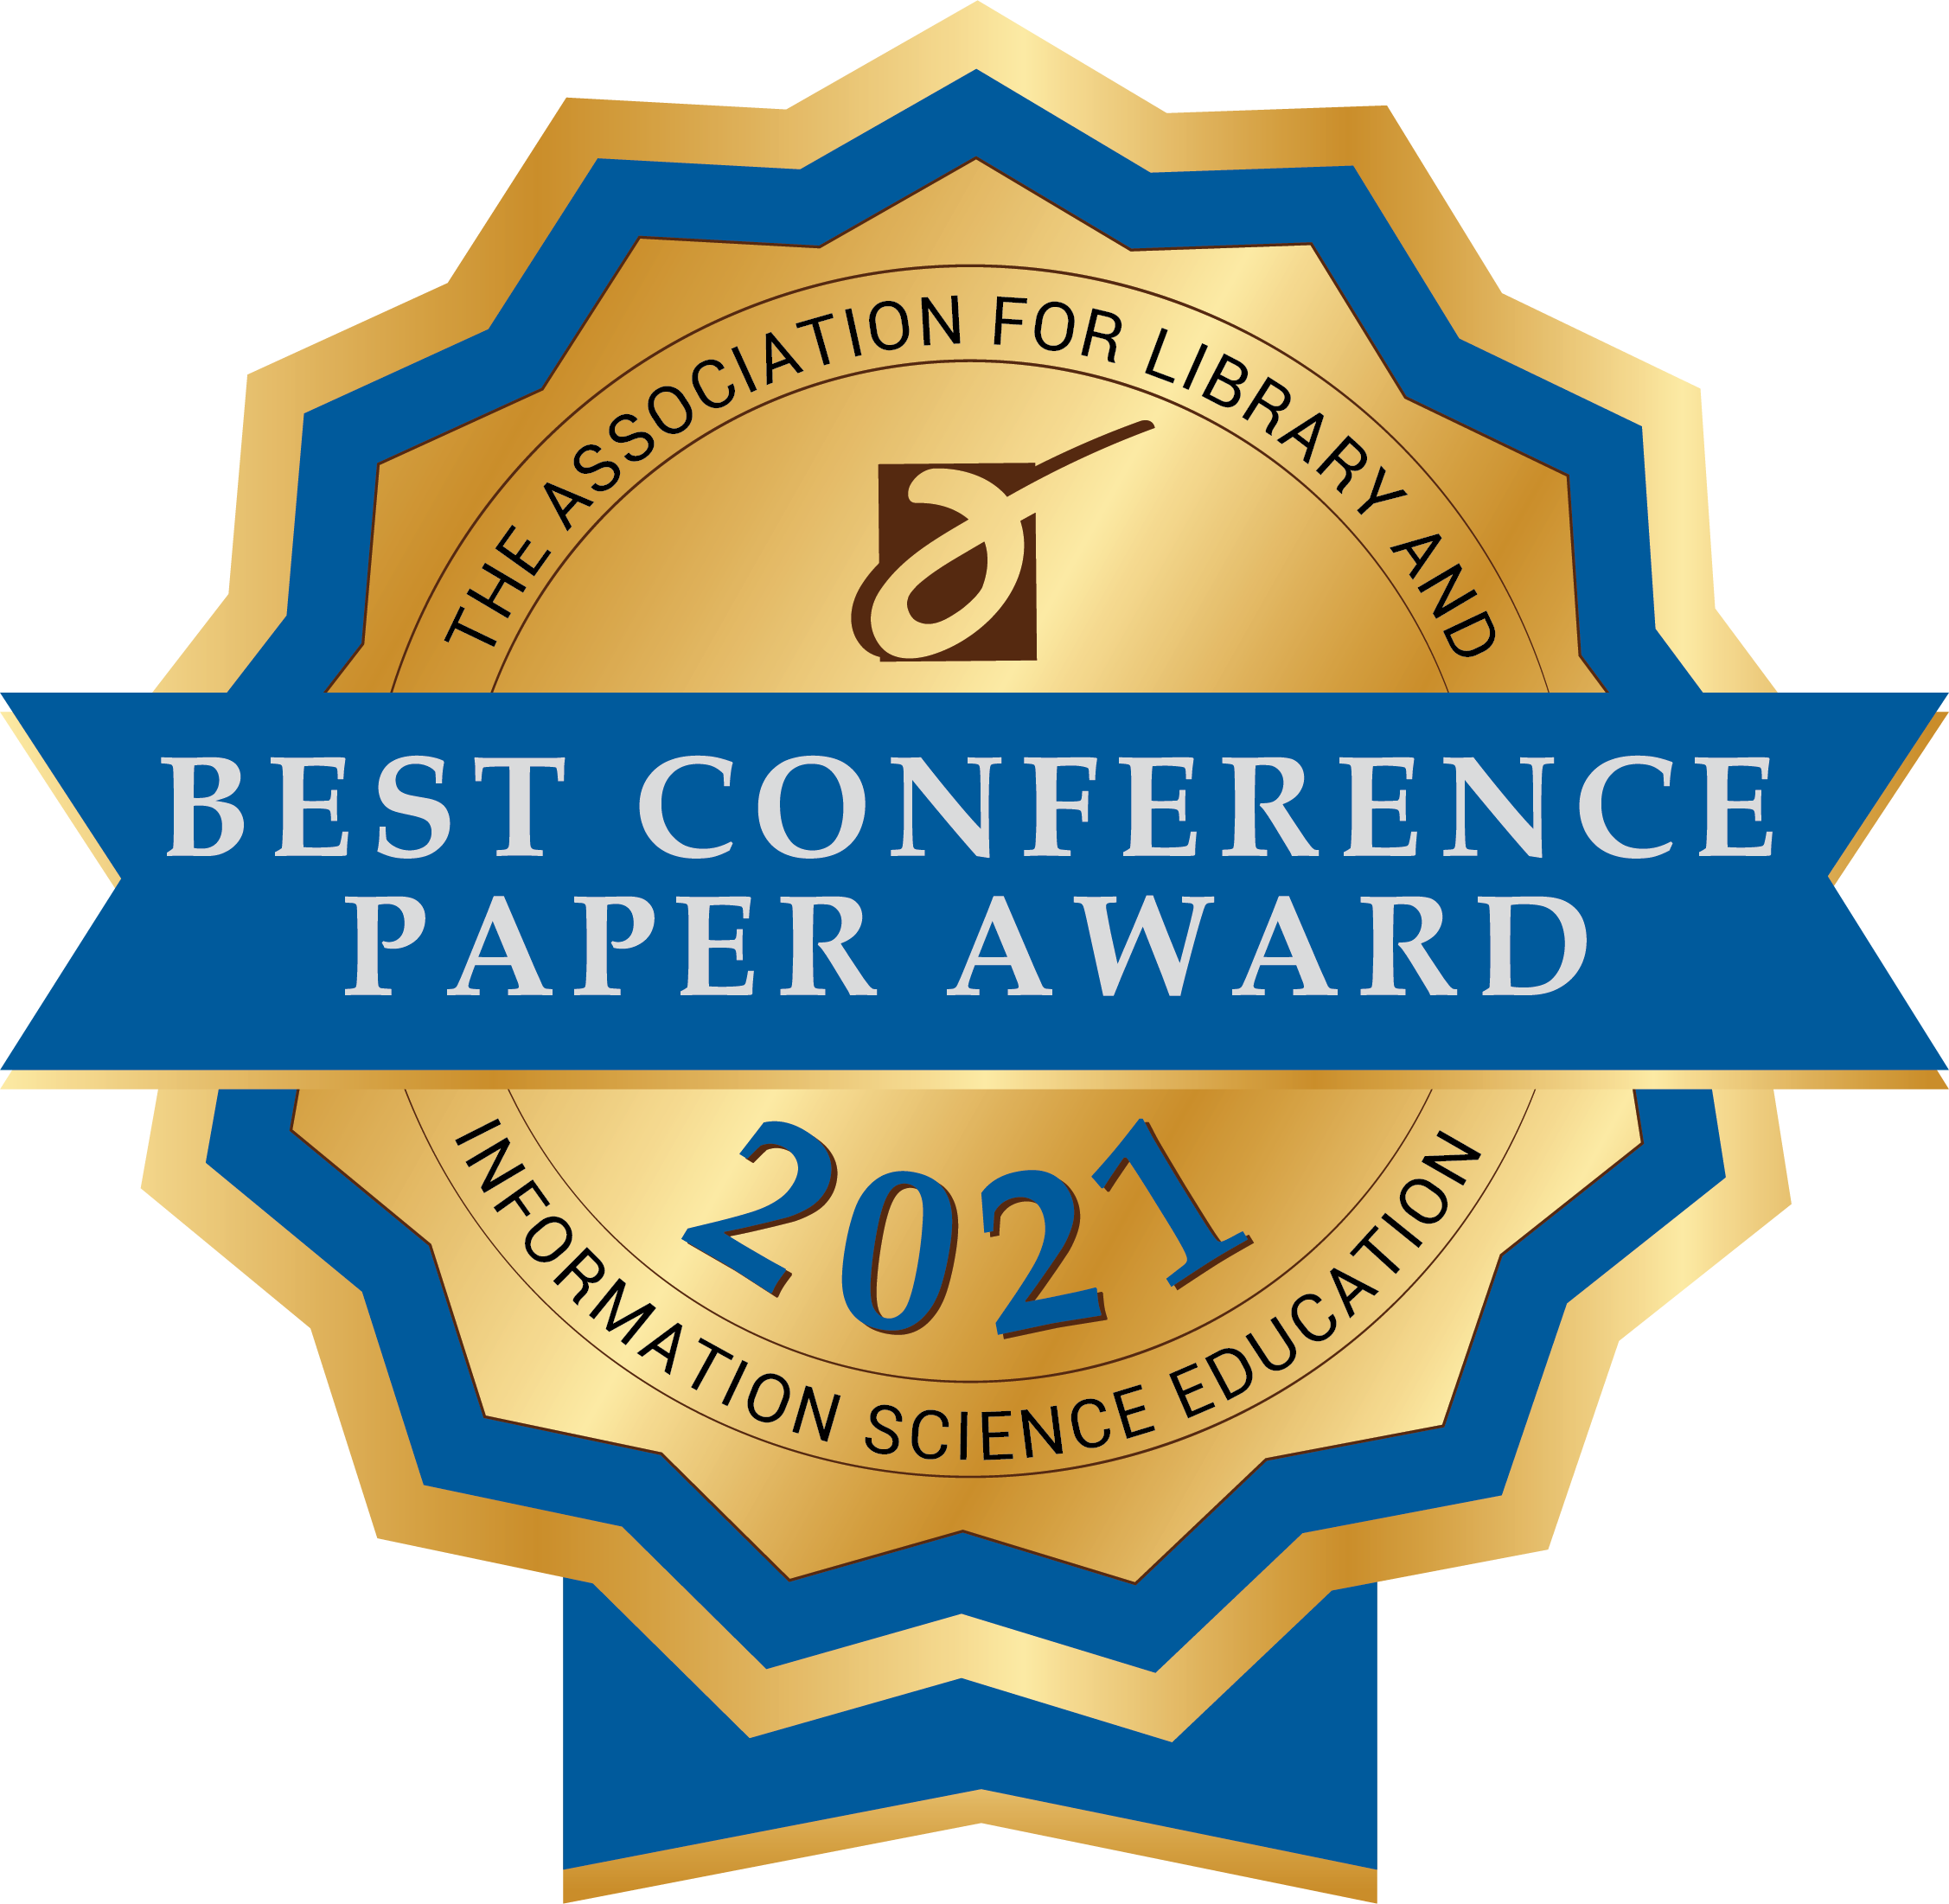 Best Conference Paper Award